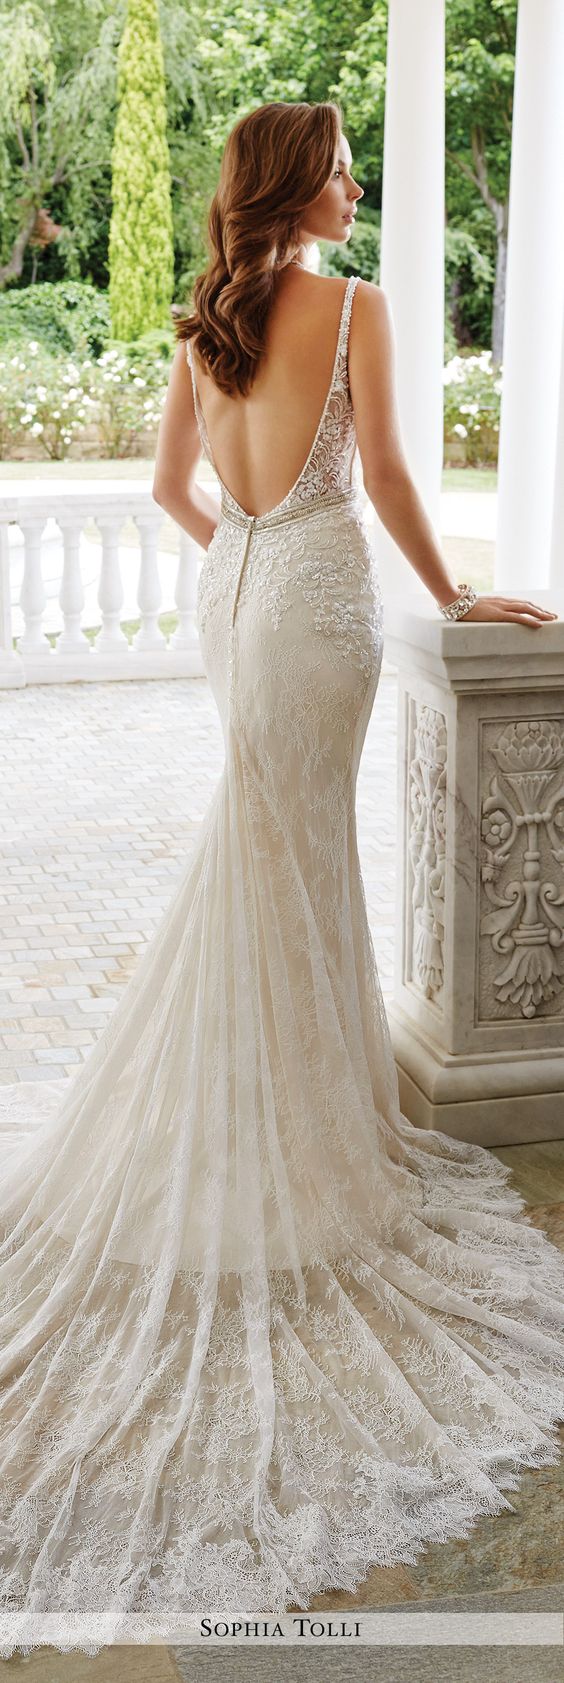 Lace Wedding Dresses for 2017